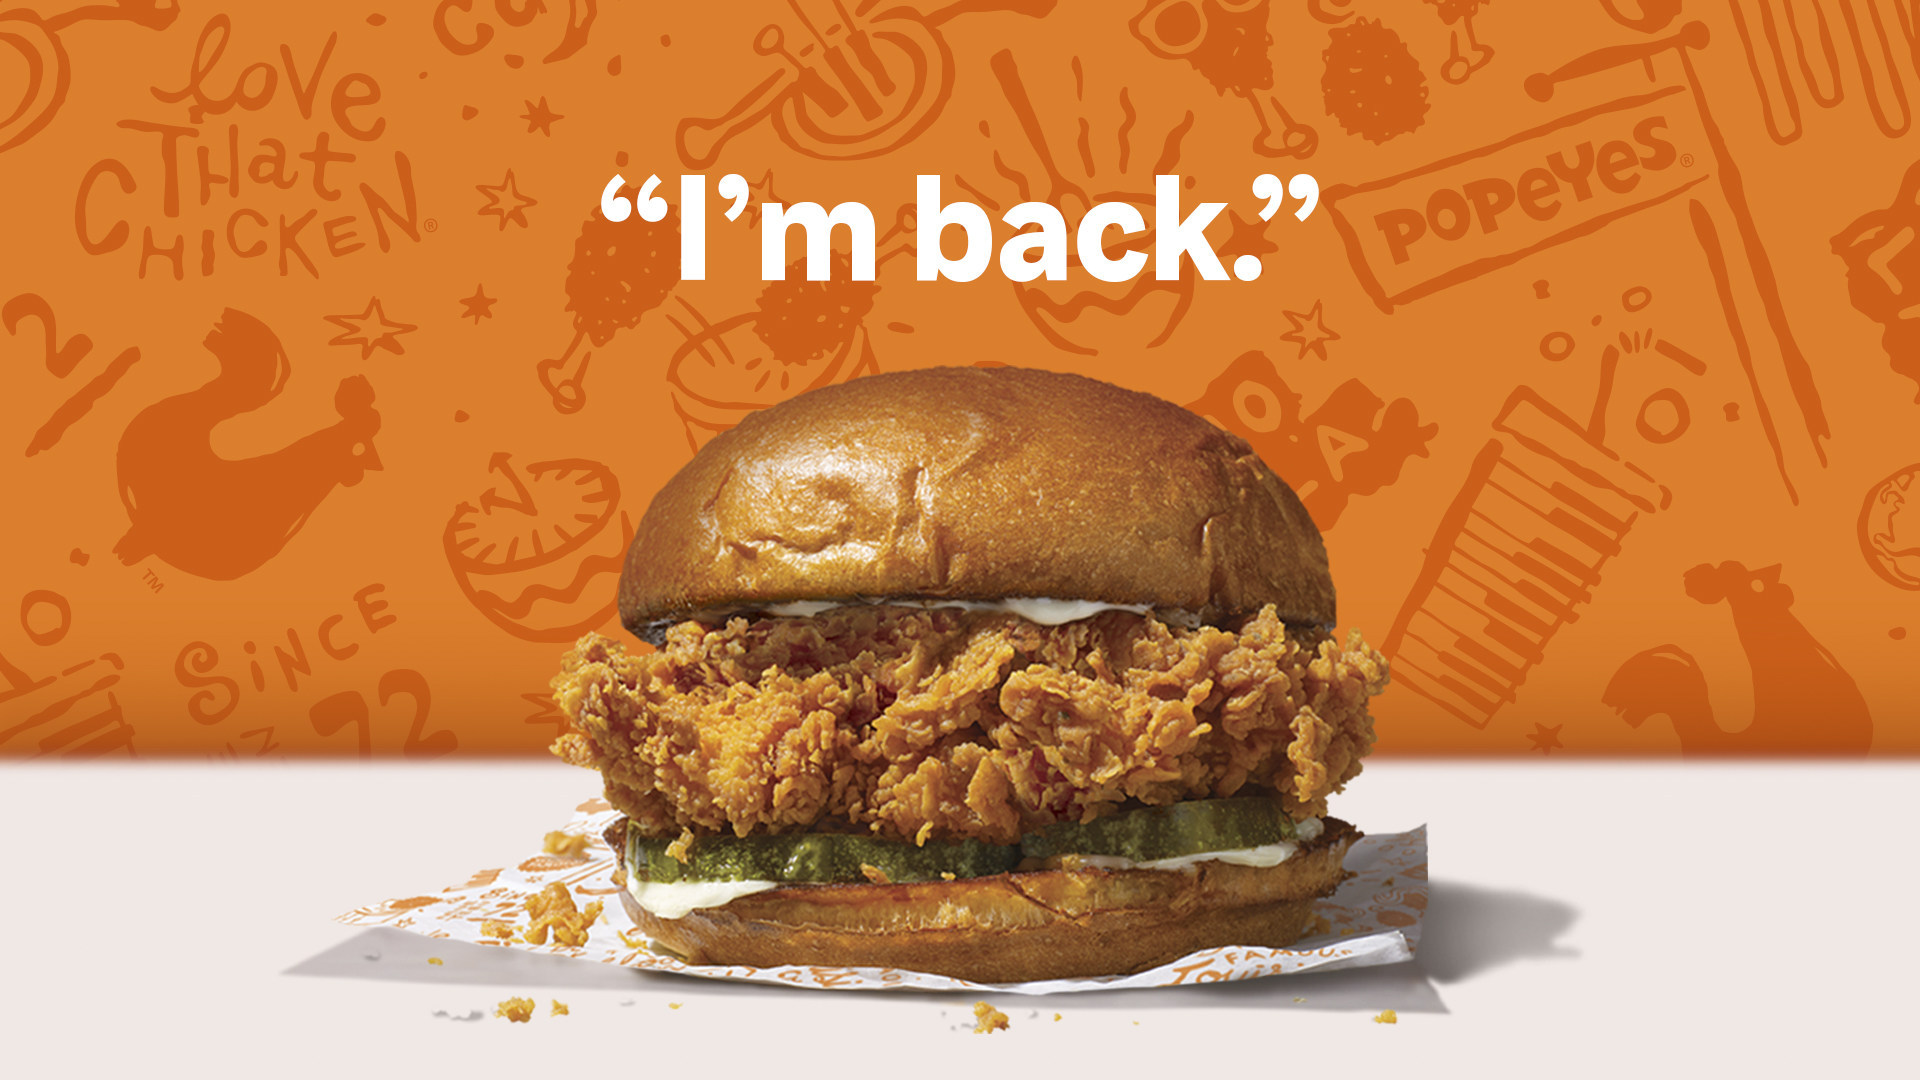 Popeyes Chicken Sandwiches Are Back on the Menu This Sunday … When Chick-fil-A Is Closed